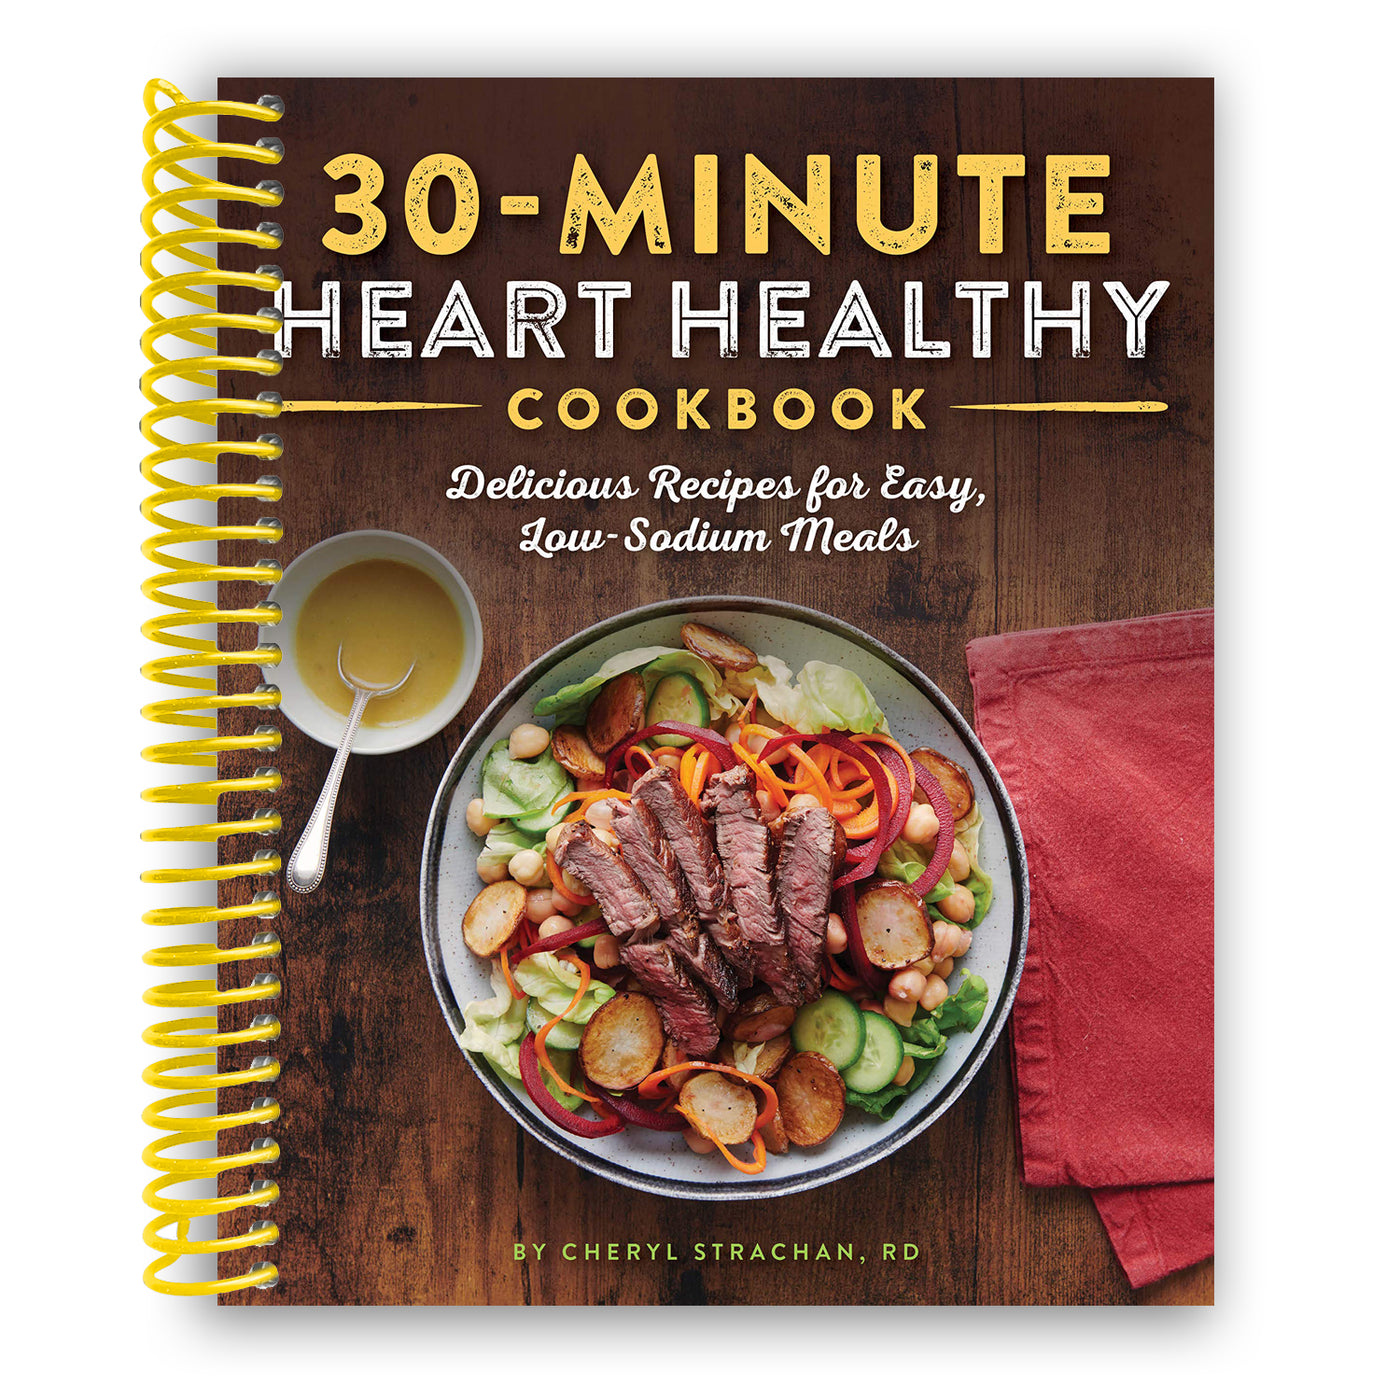 The 30-Minute Heart Healthy Cookbook: Delicious Recipes for Easy, Low-Sodium Meals (Spiral Bound)